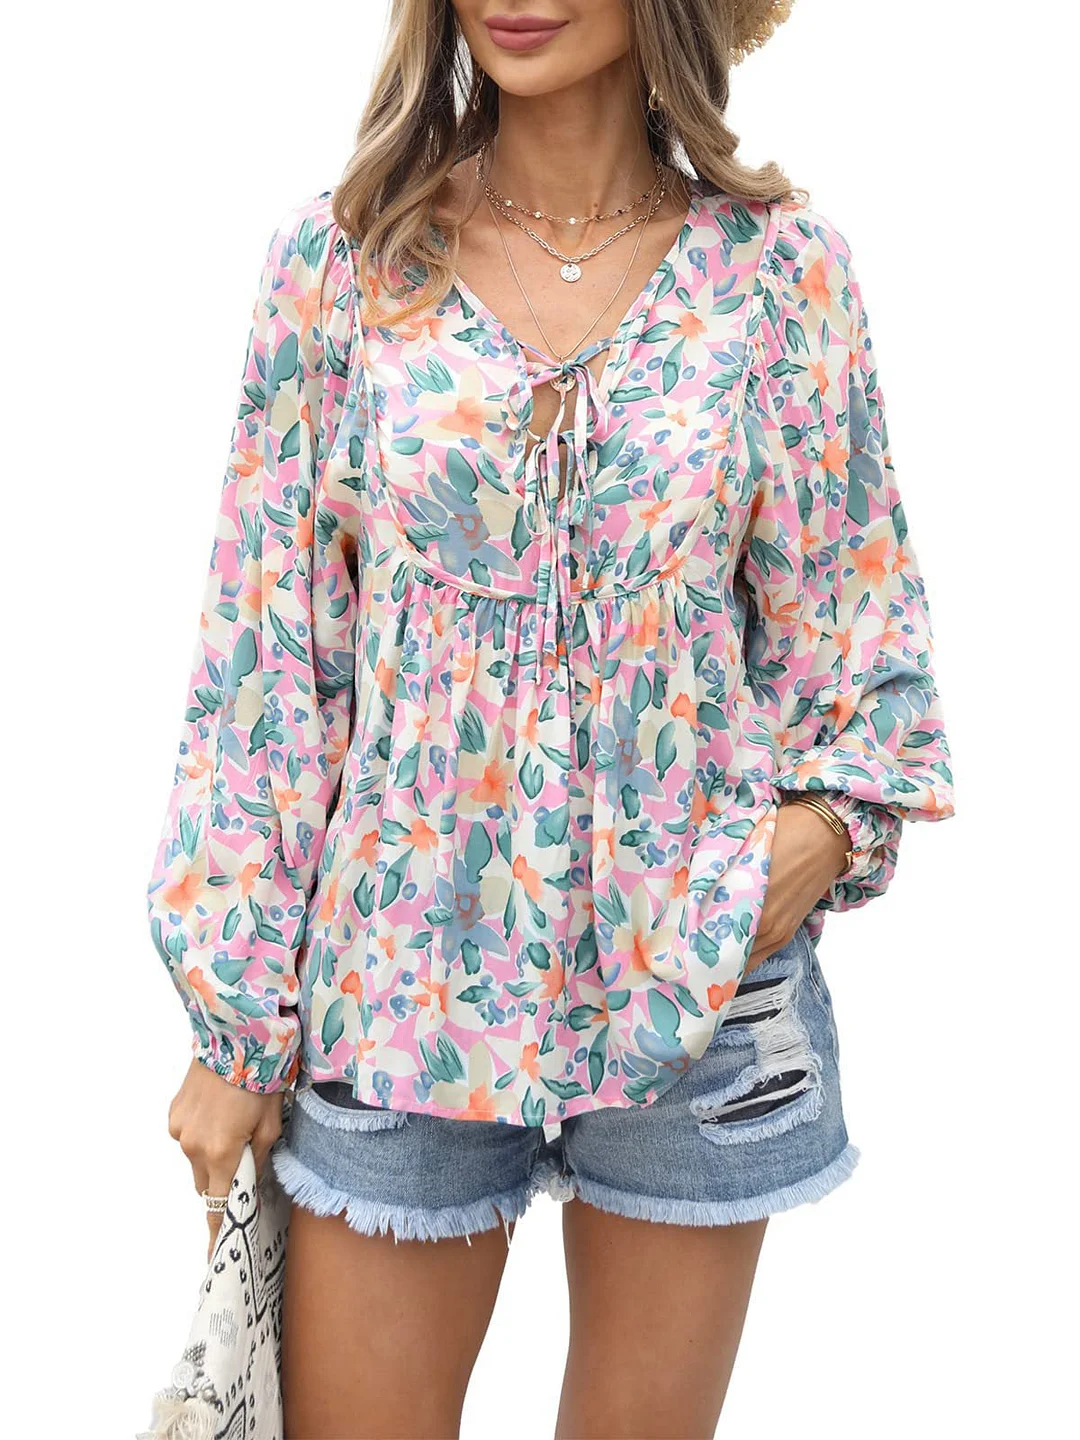 Women plus size clothing Women Long Sleeve V-neck Floral Printed Top-Nordswear